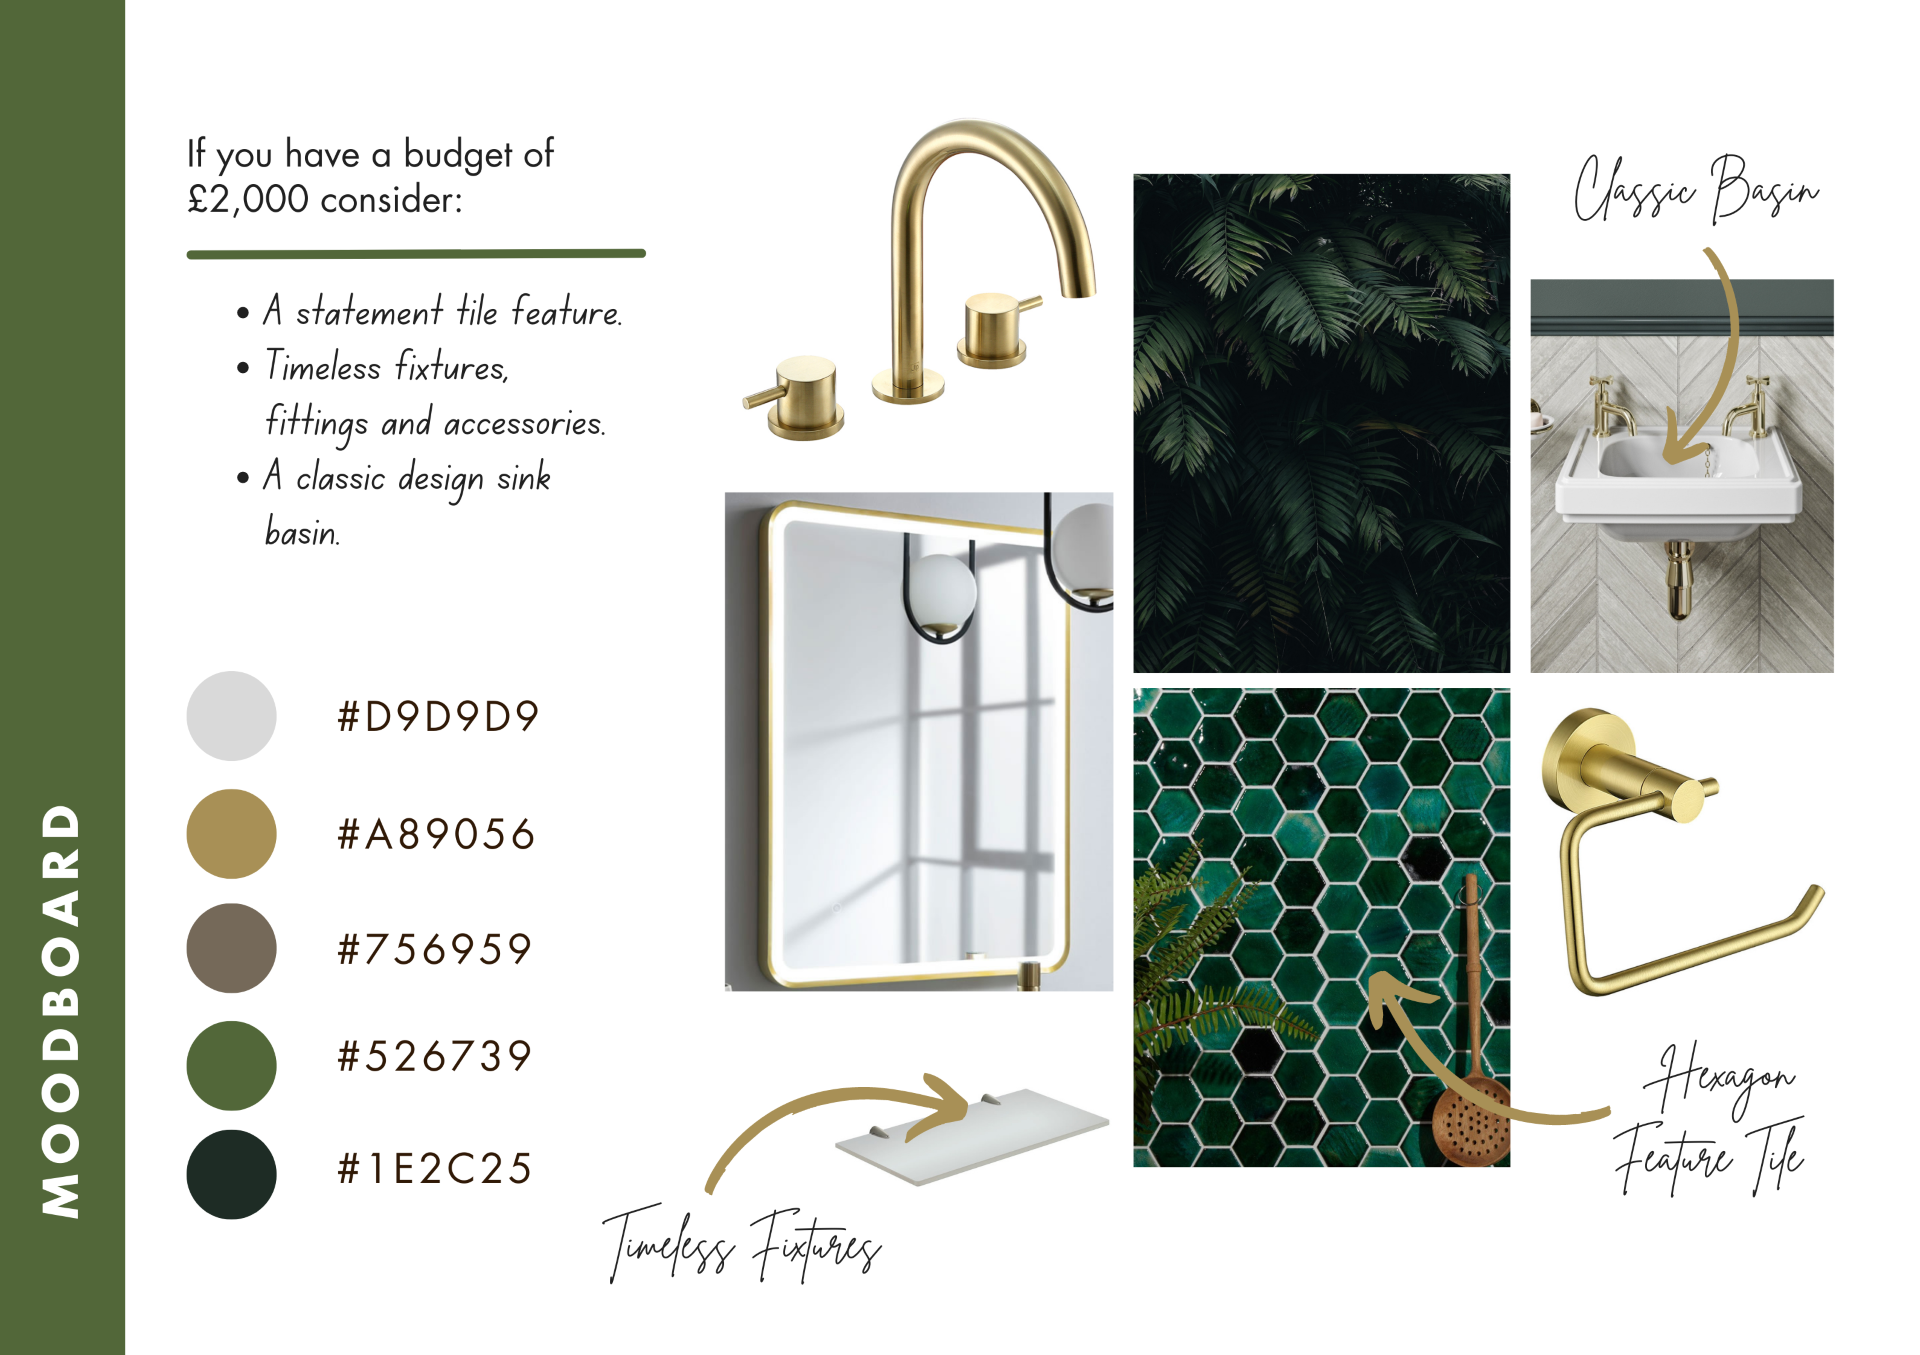 infographic showing moodboard of images for what can be done on a £2000 budget when renovating a bathroom